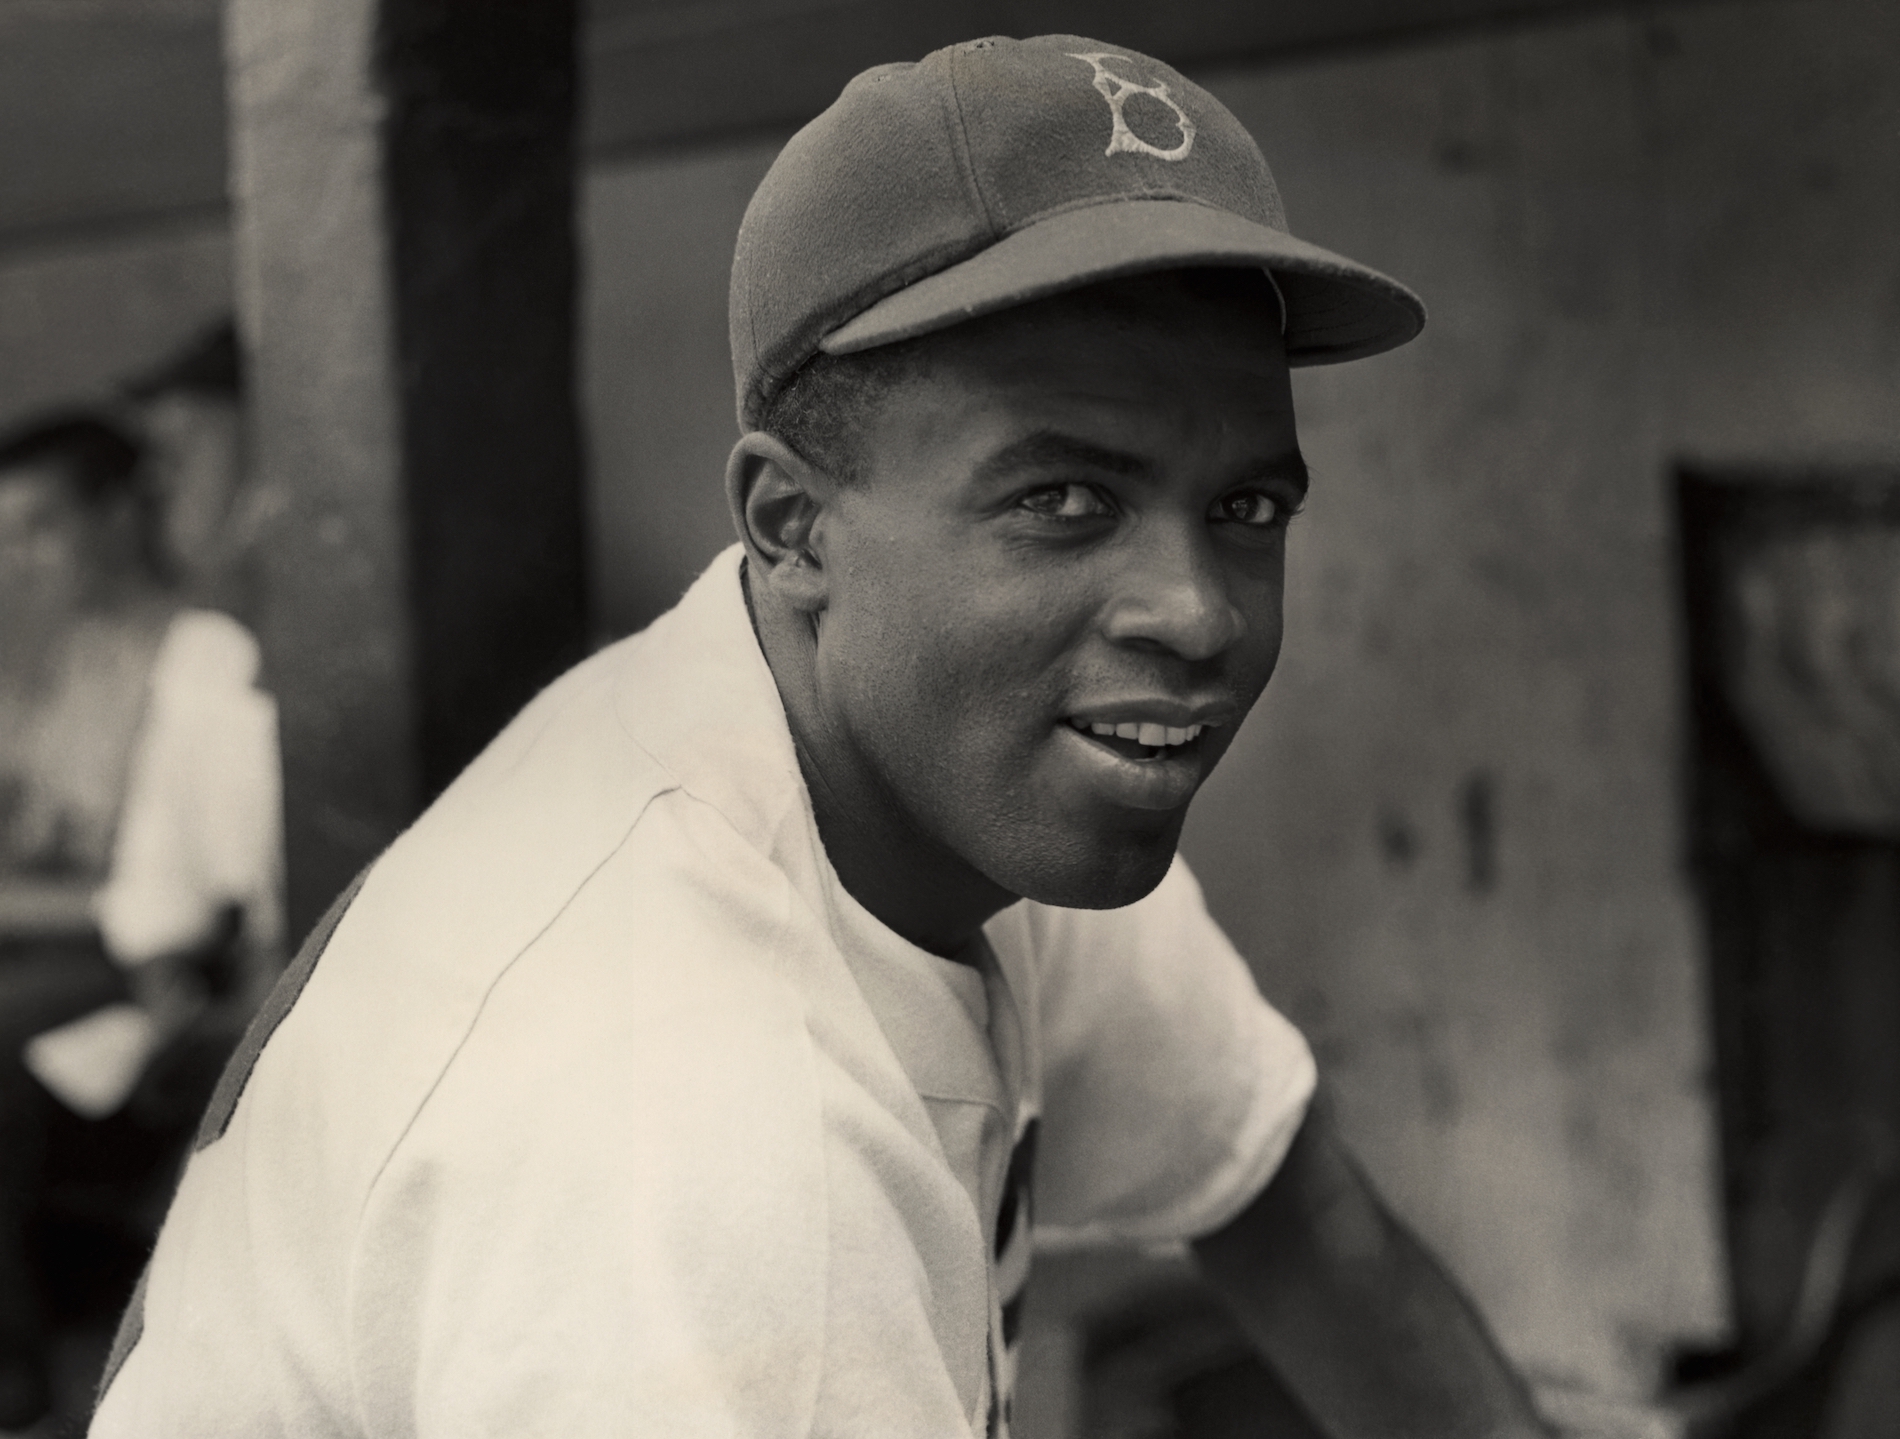 Jackie Robinson changed the MLB forever by breaking the color barrier, but his tragic death in 1972 shocked the baseball world.